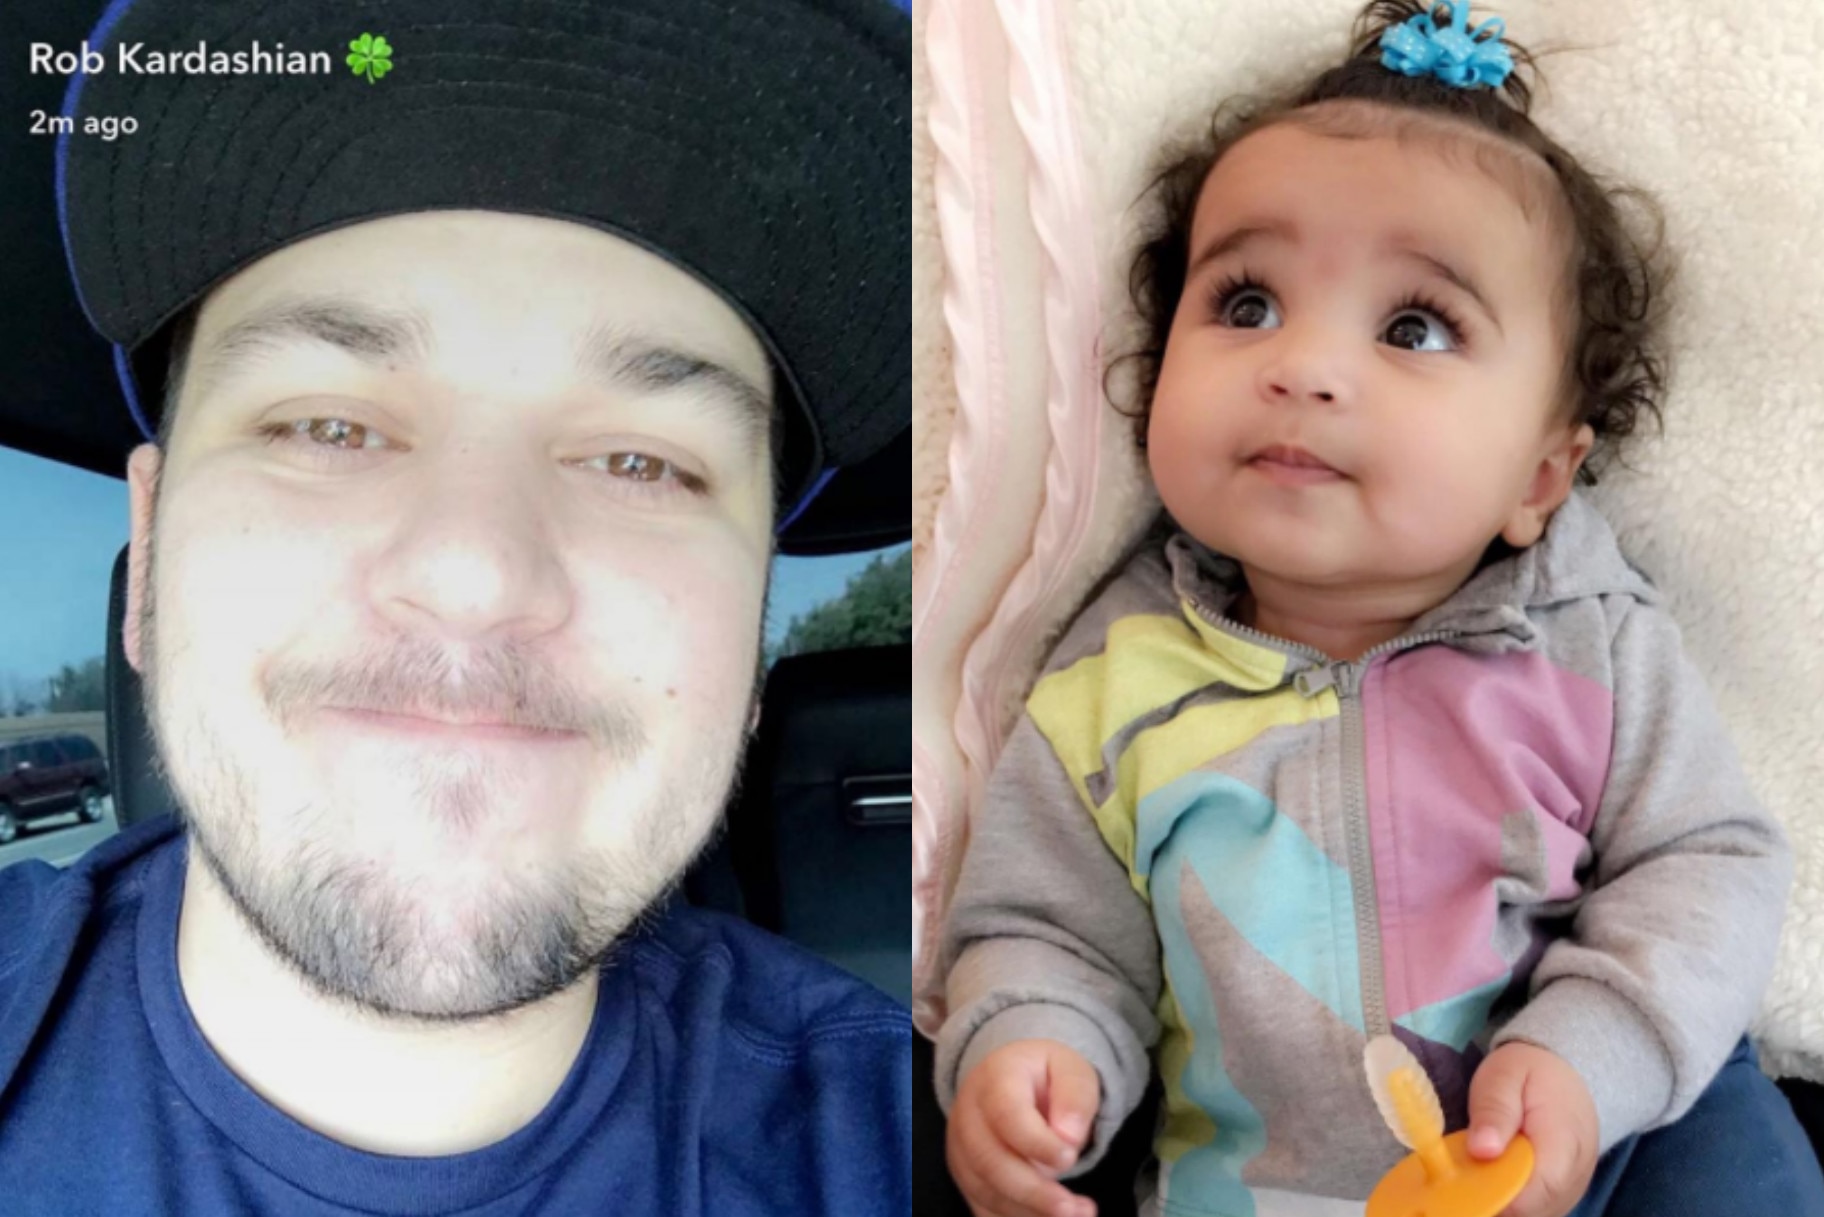 Rob Kardashian Slams Shady Instagram Post About His Daughter | Very Real